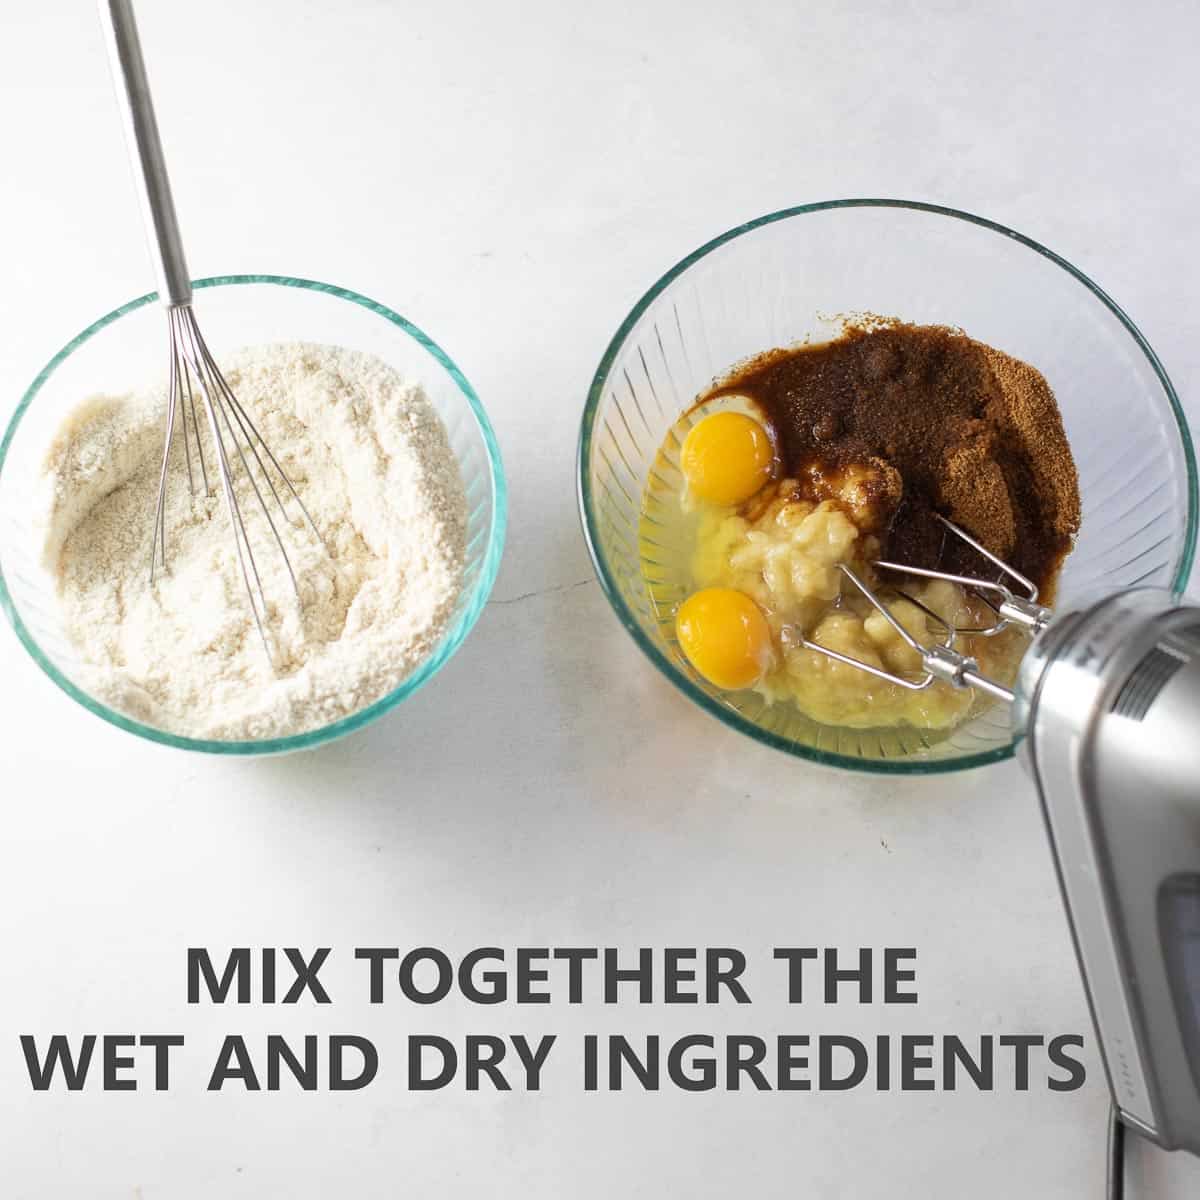 titled photo shows one step in making paleo banana bread: "mix together the wet and dry ingredients"